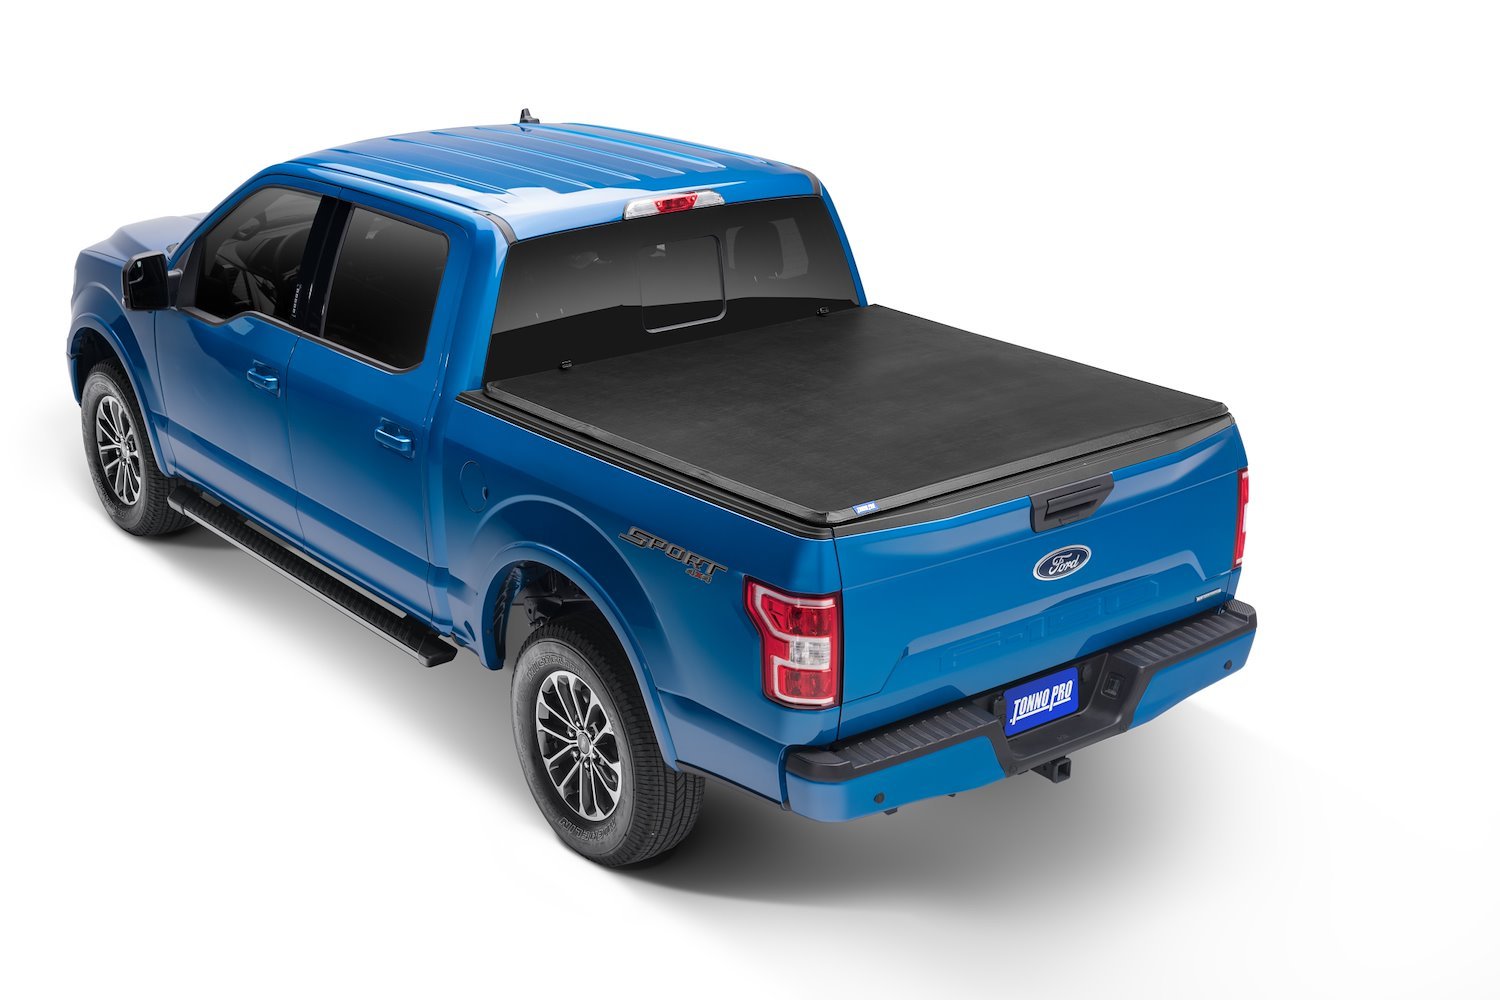 Soft Vinyl Tri-Fold Tonneau Cover Fits Select Ford F-150 Trucks [5 ft. 7 in. Bed]